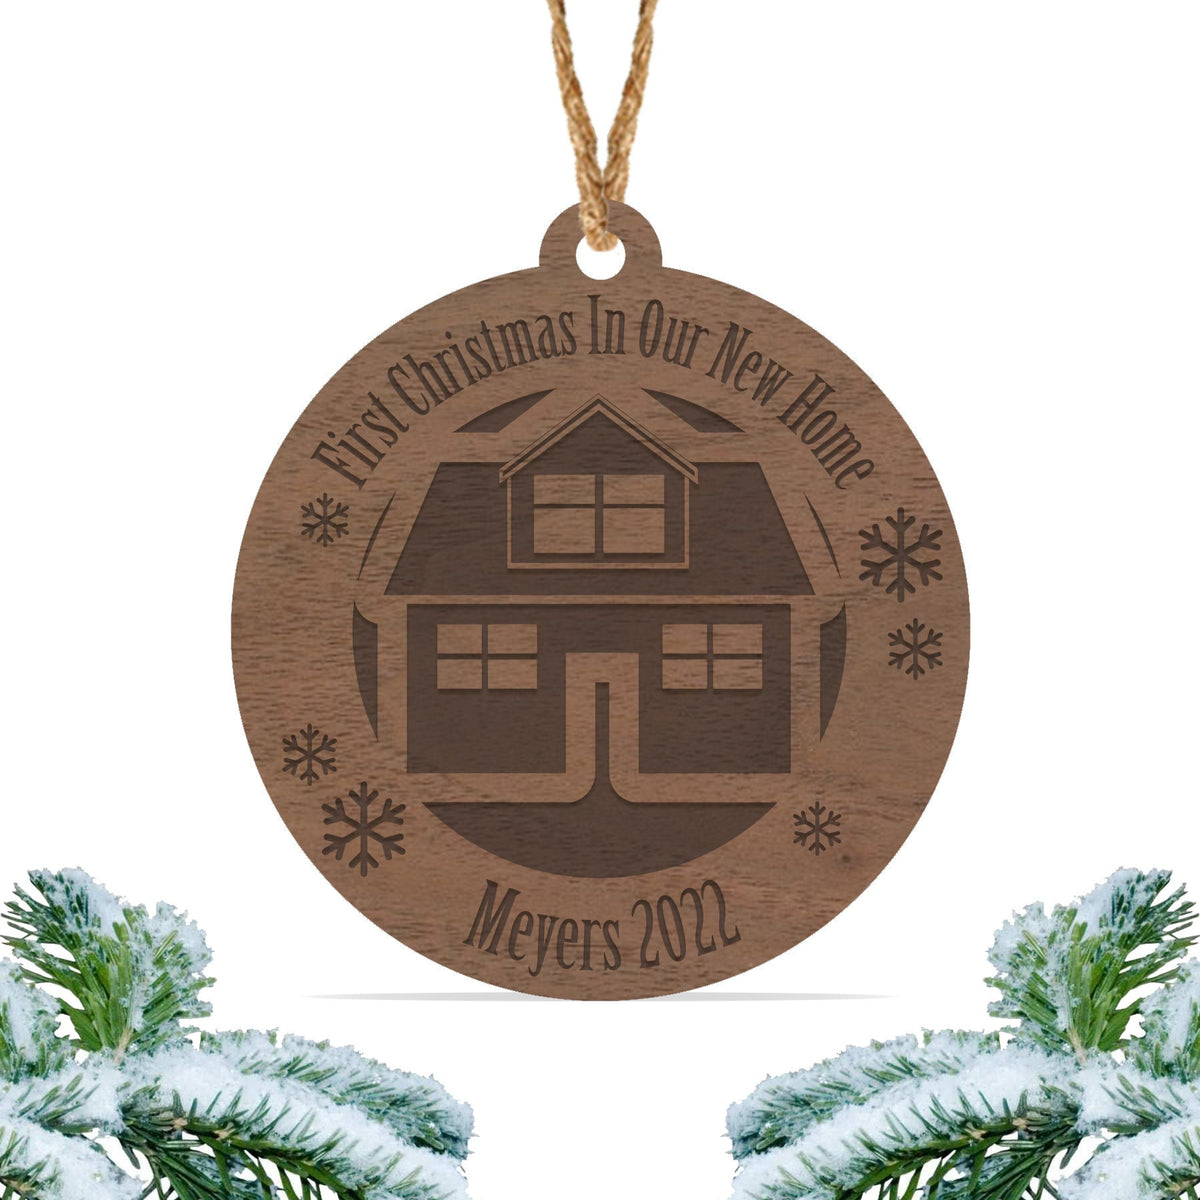 First Christmas in our new home ornament, Personalized engraved wood Christmas ornament, First Christmas ornament / Laser engraved